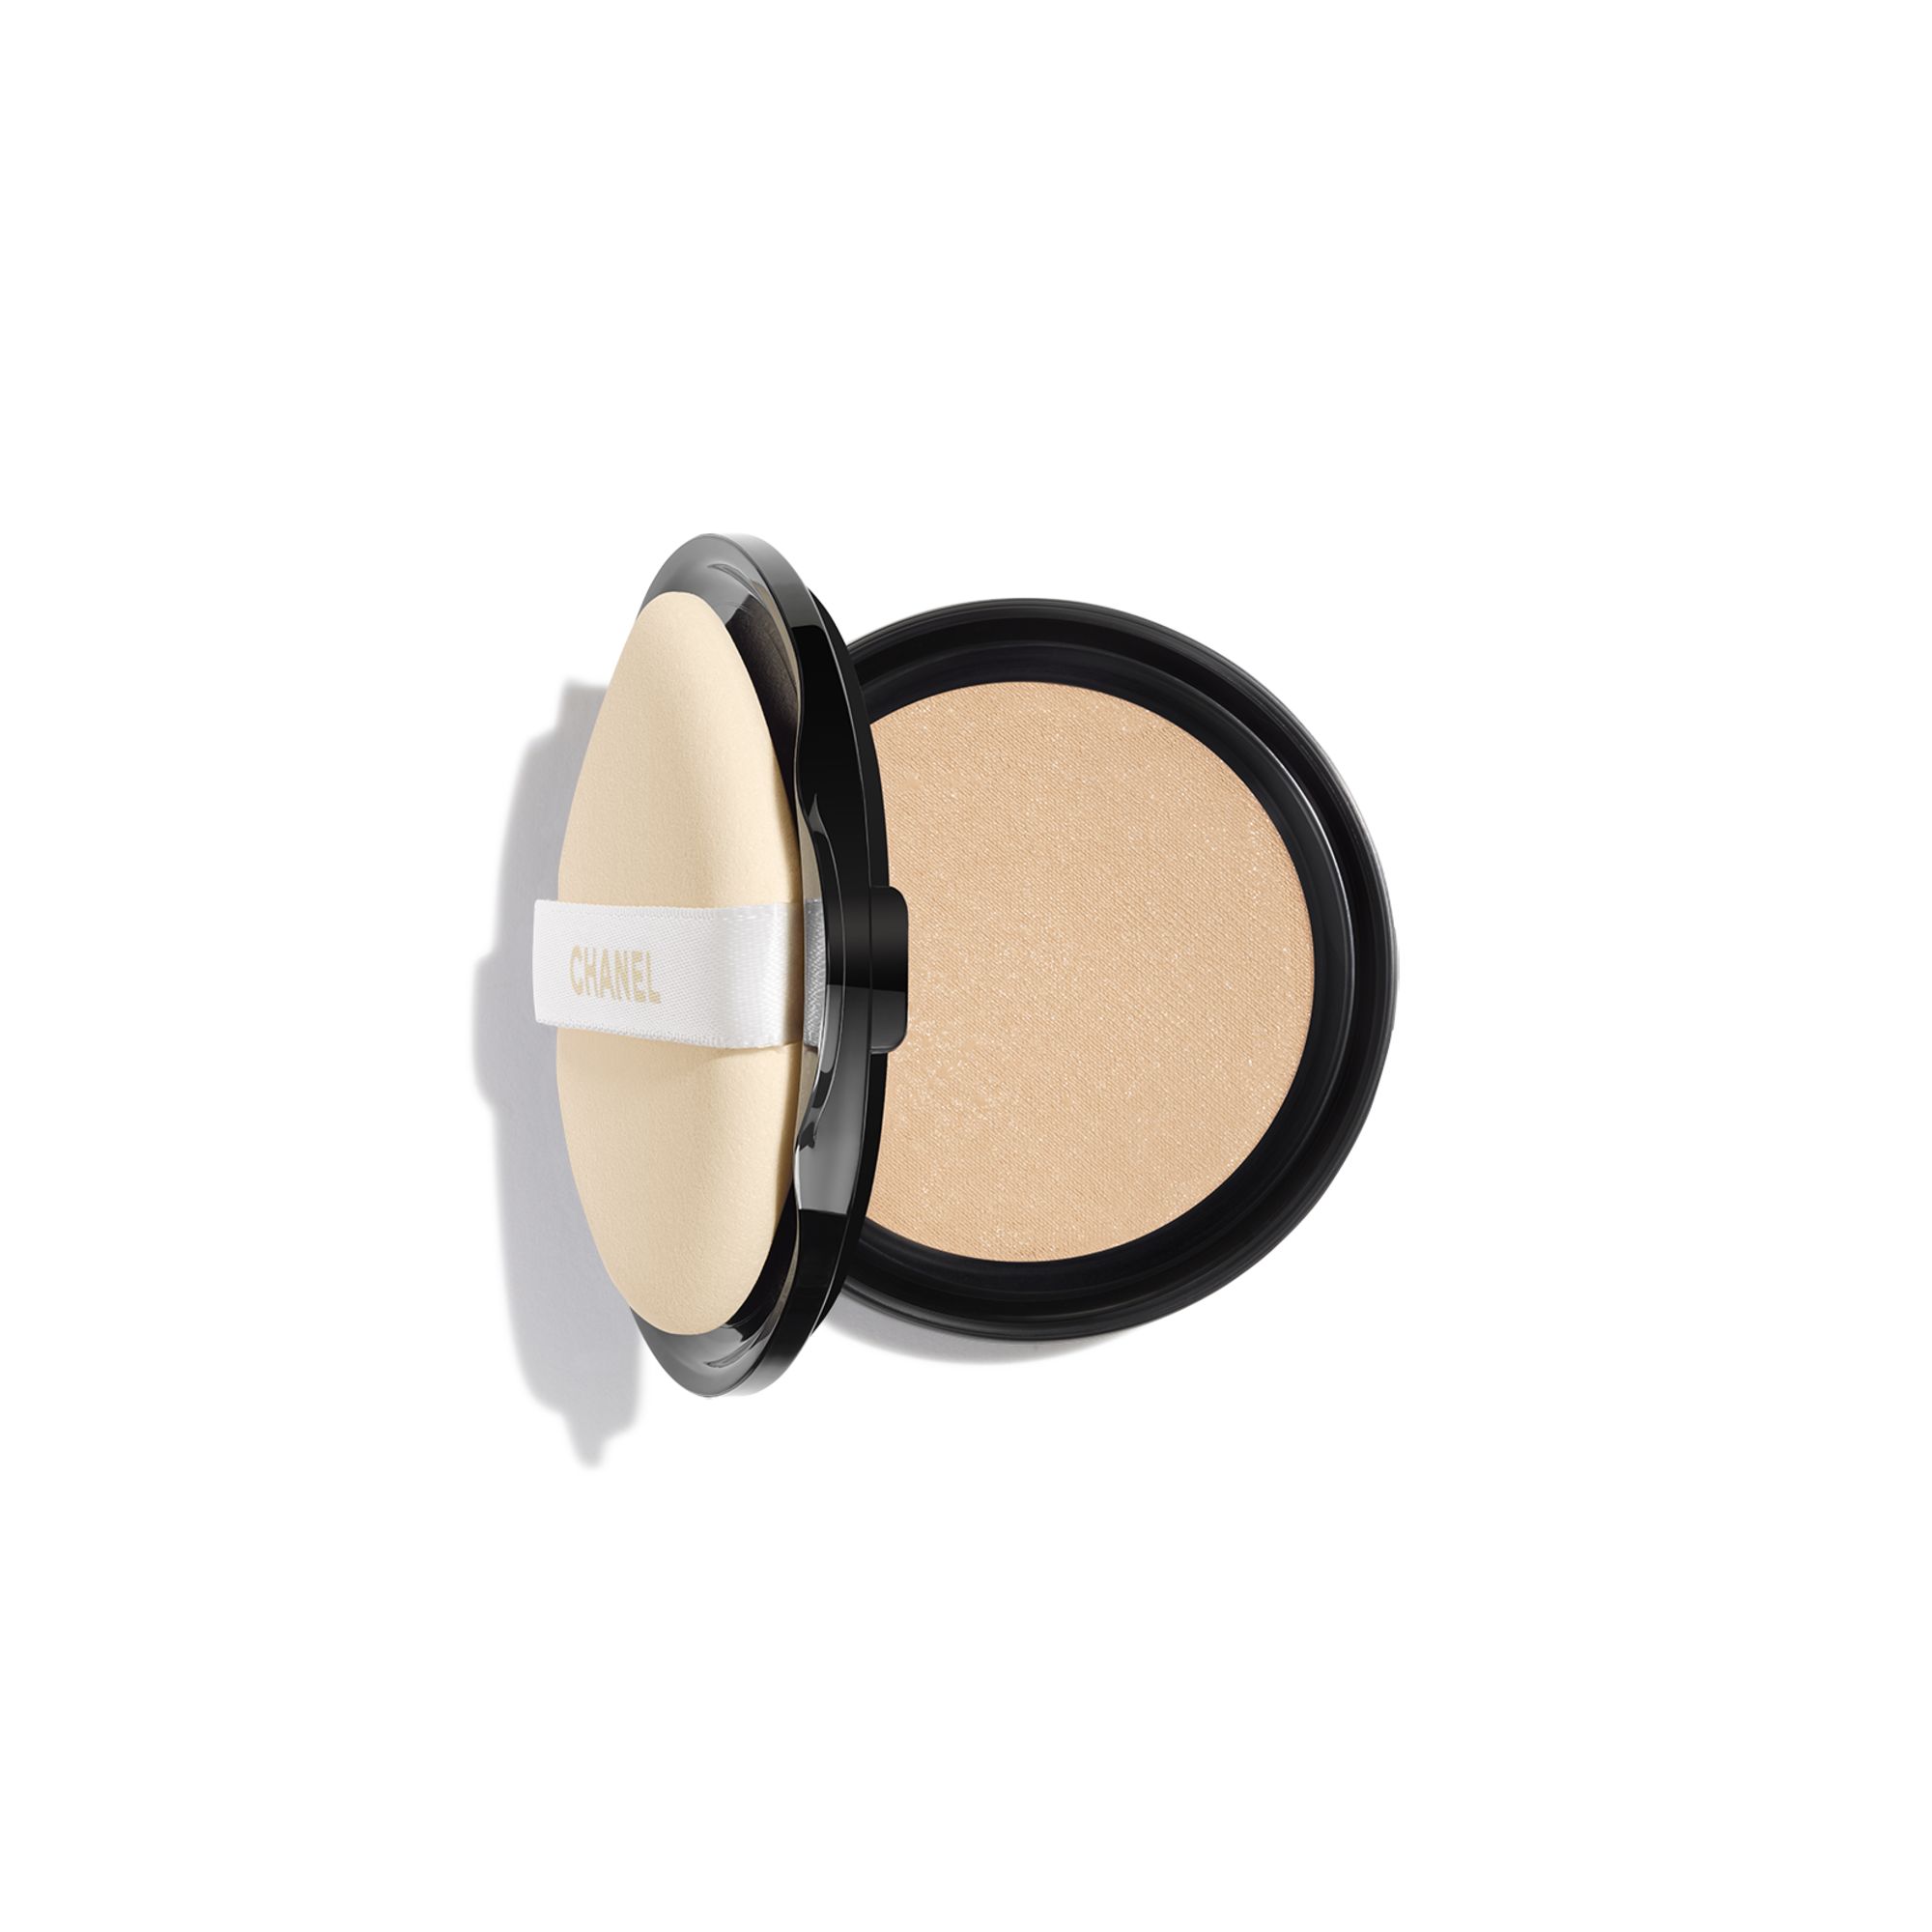 Chanel Les Beiges Cushion Healthy Glow Gel Touch Foundation Spf 25 / Pa ++